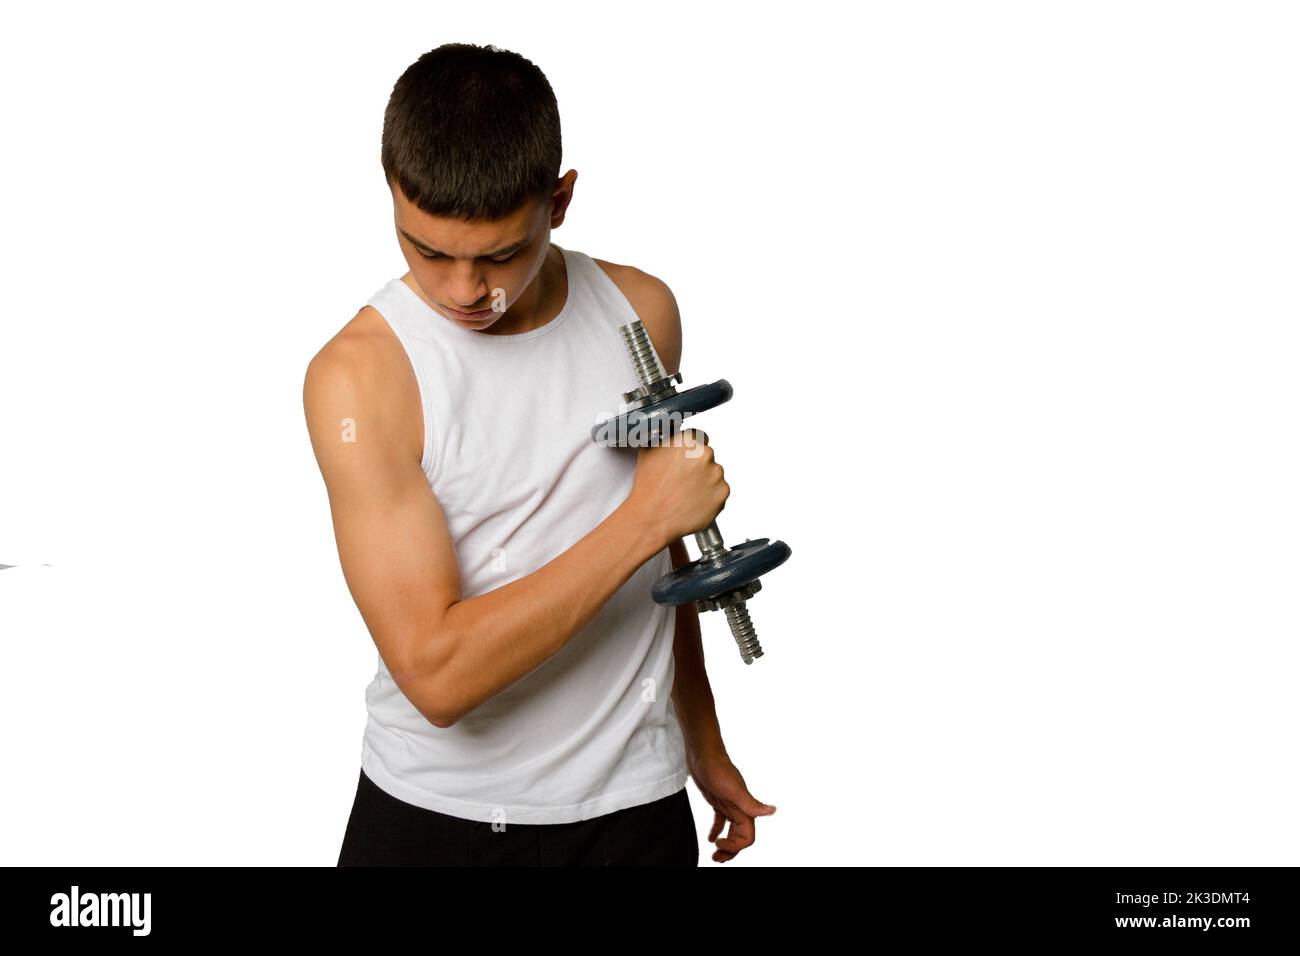 19 year old teenage boy in a tank top exercising his biceps Stock Photo